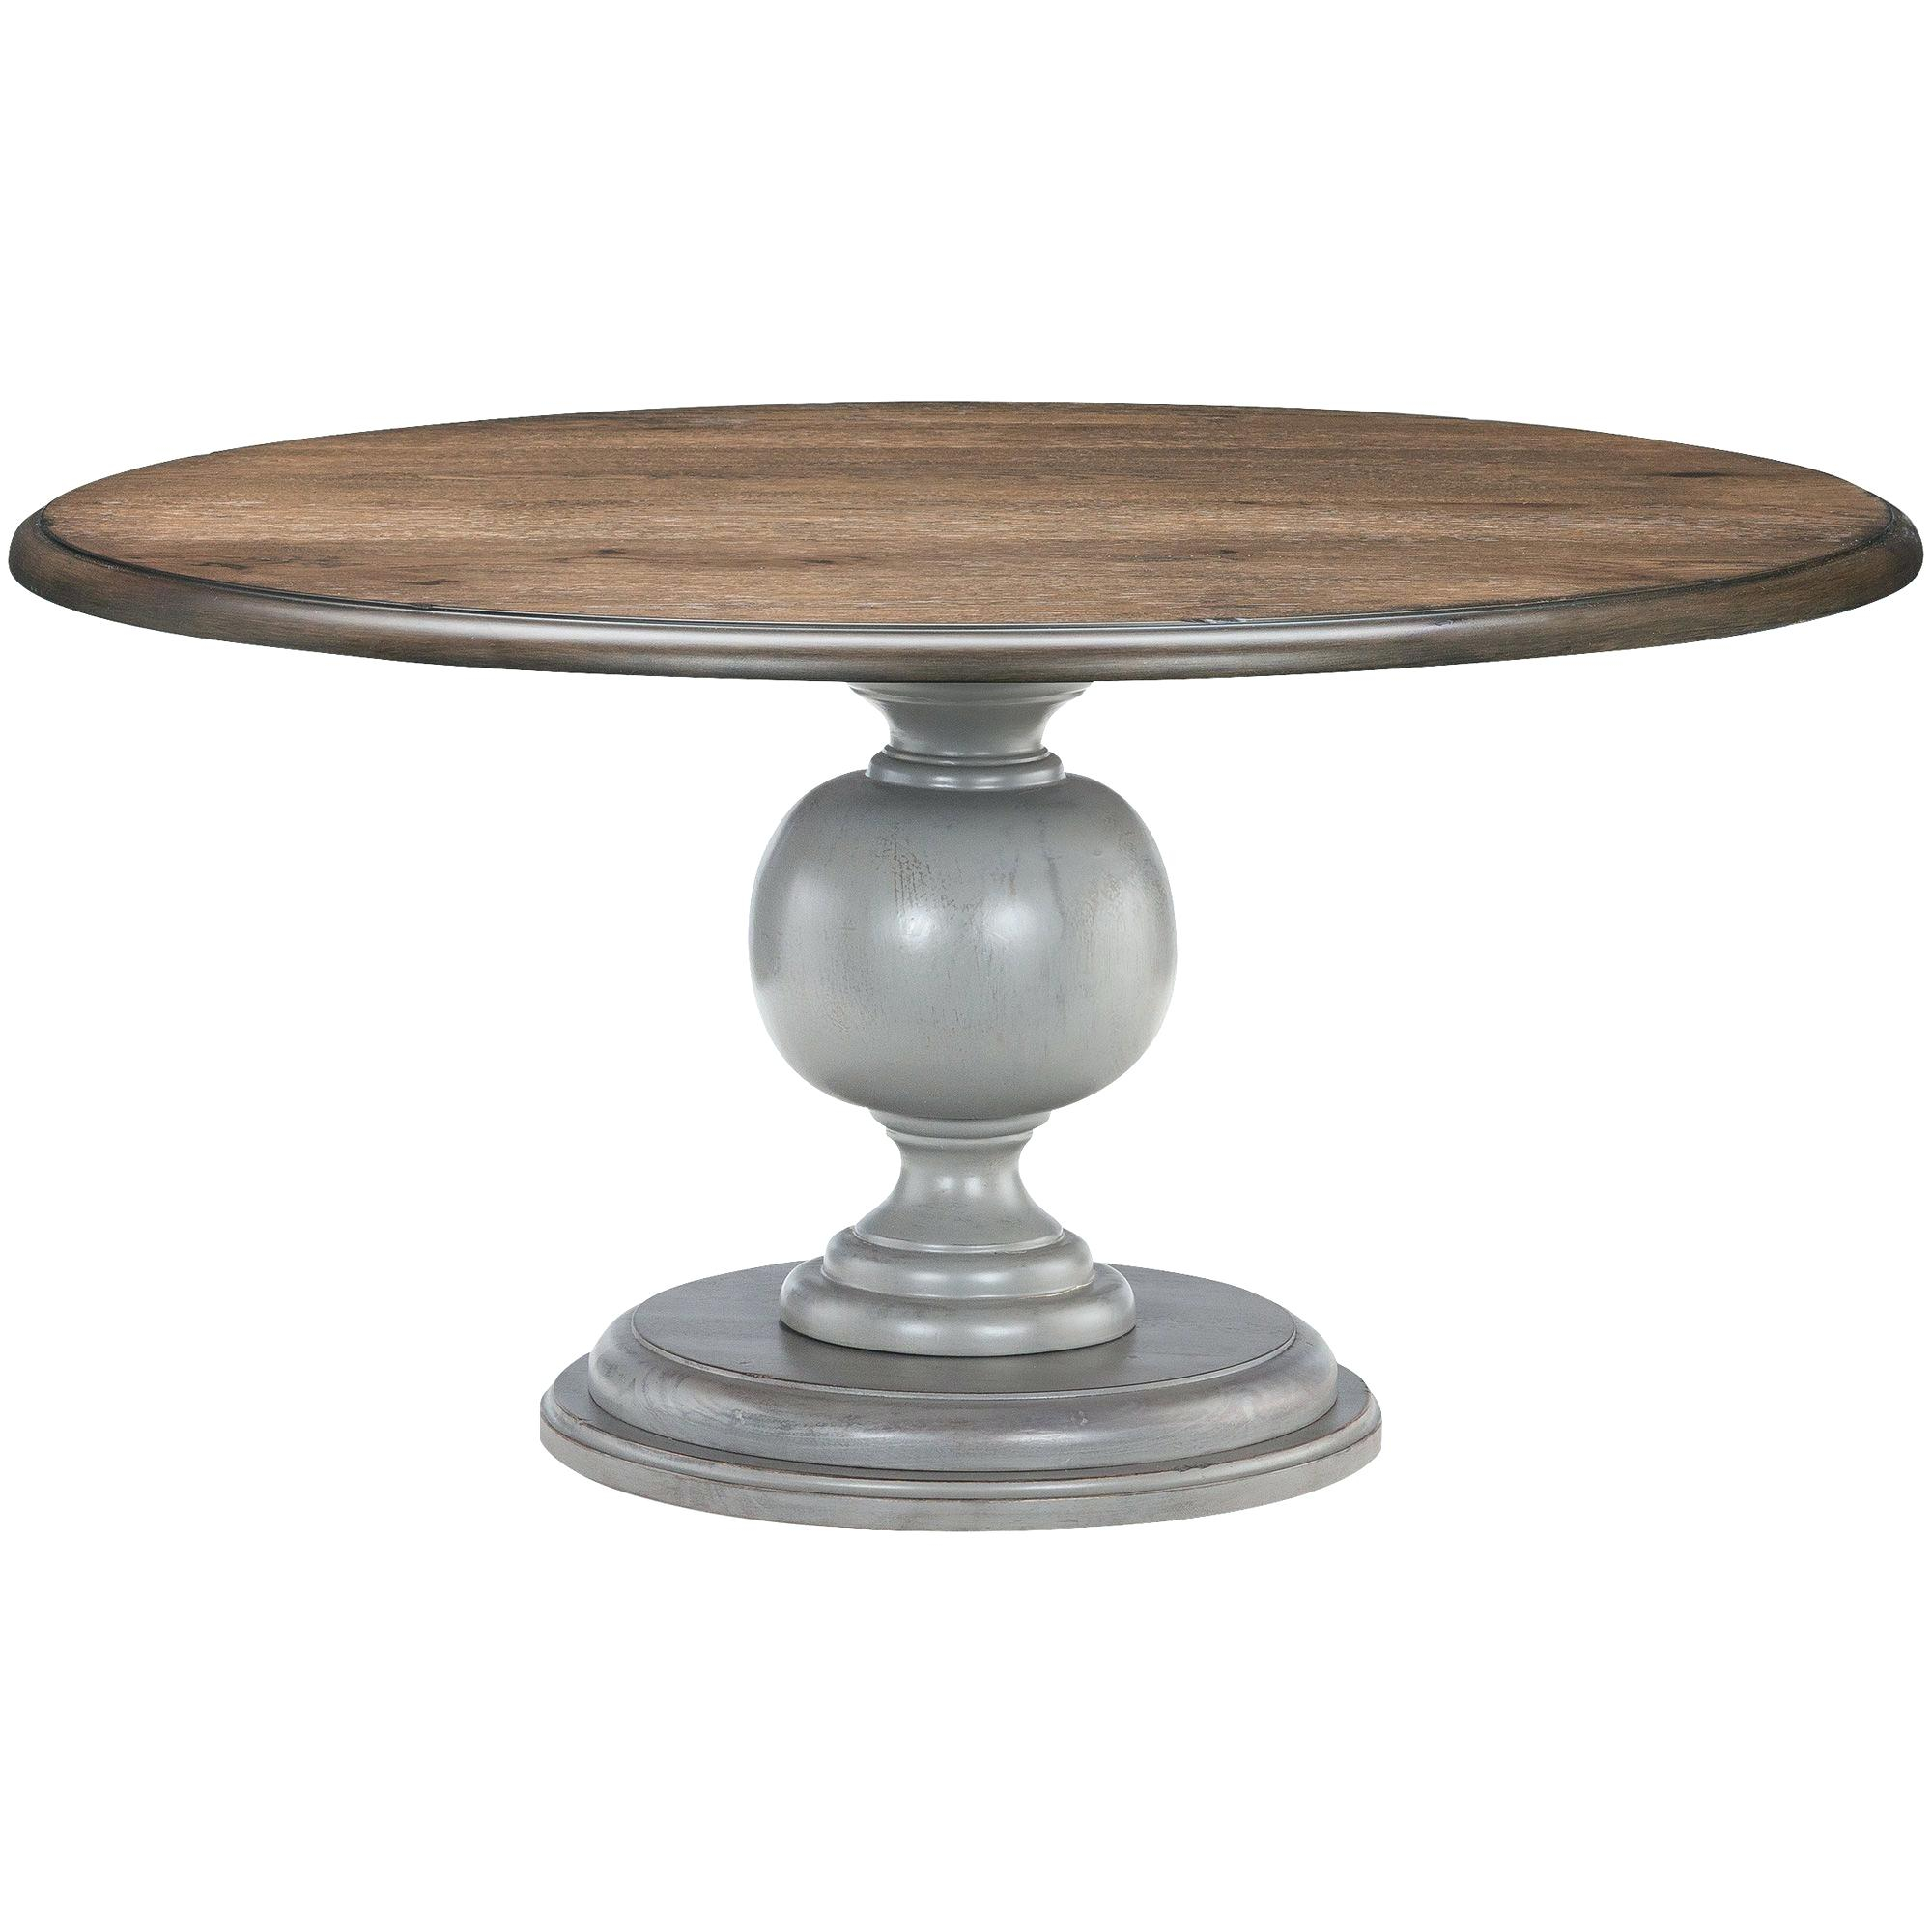 Round Pedestal Coffee Table Images Colonnades Wooden Metal Base with size 2000 X 2000